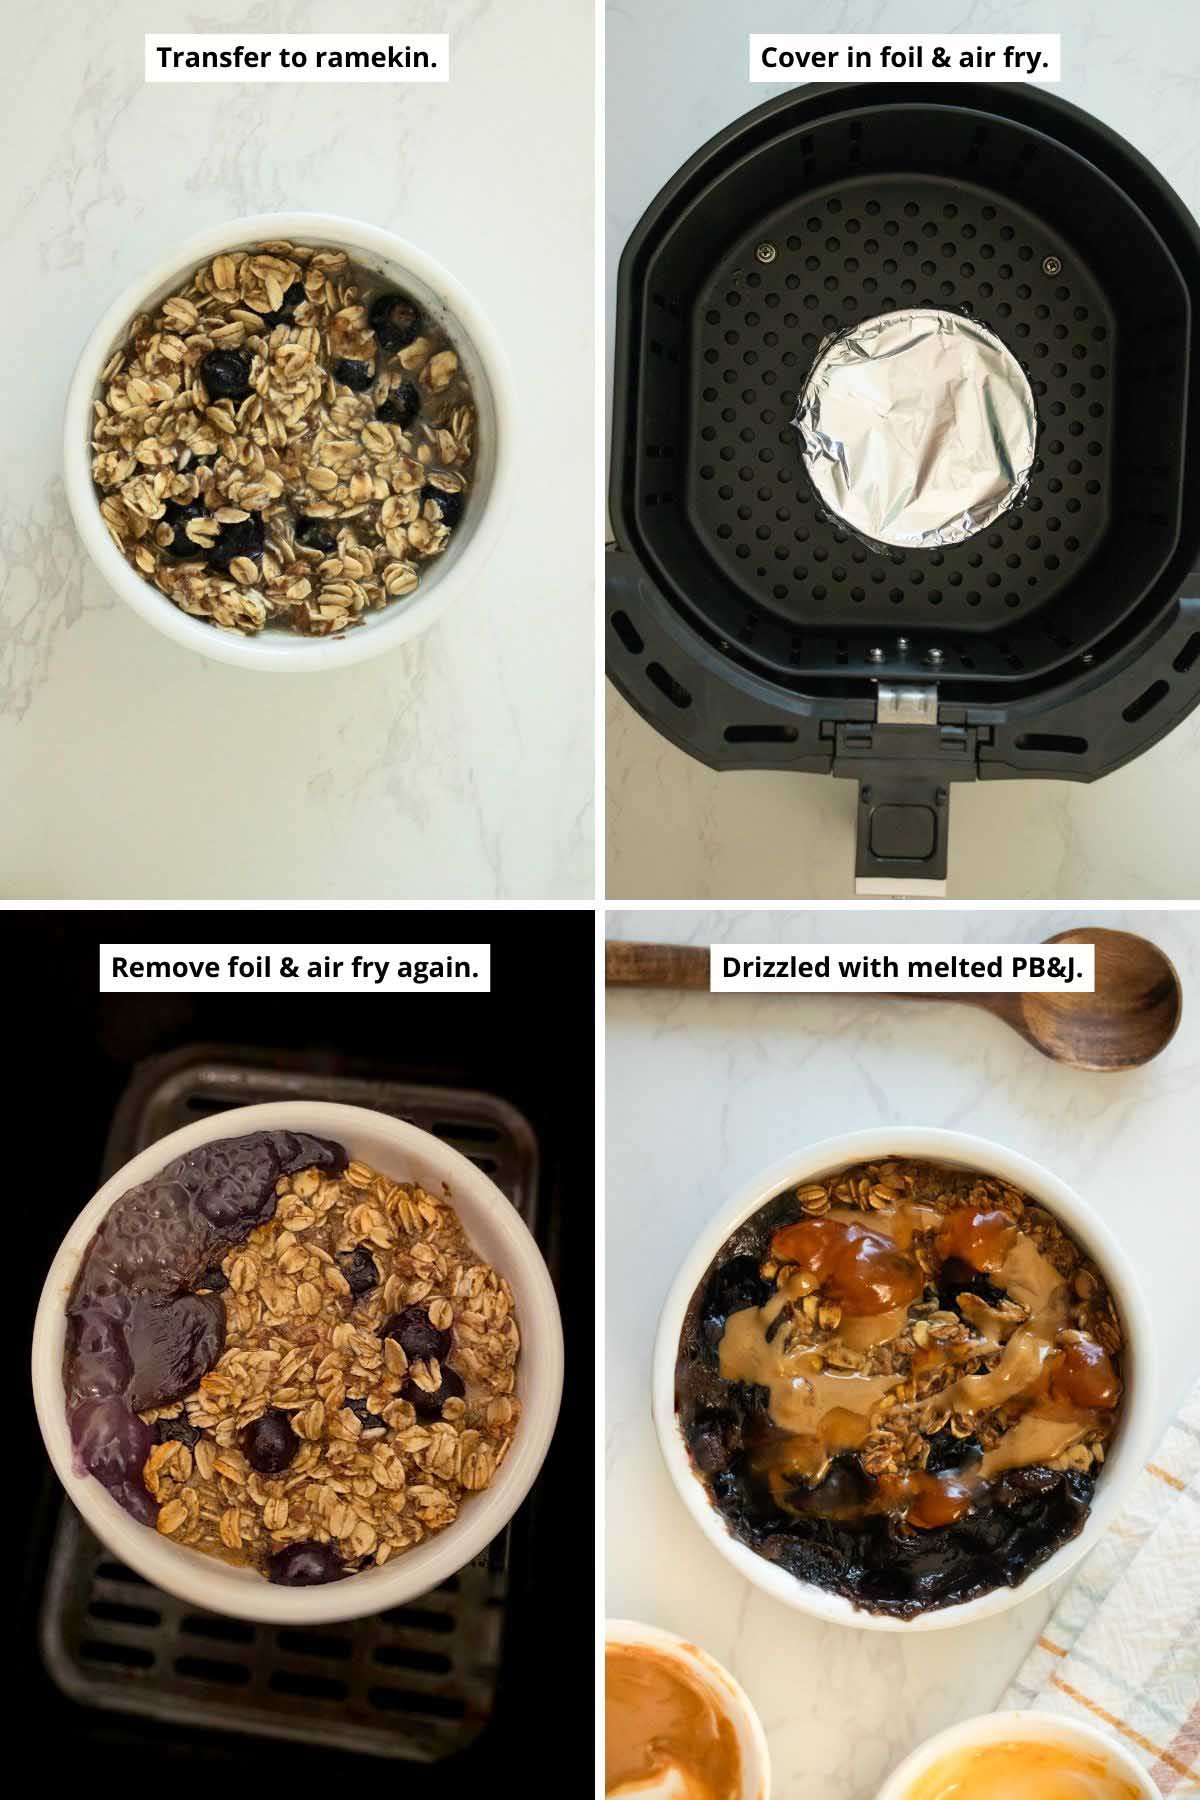 image collage showing the oats mixture in the ramekin, the covered ramekin in the air fryer, the uncovered ramekin in he air fryer, and the finished air fryer baked oatmeal topped with peanut butter and jelly